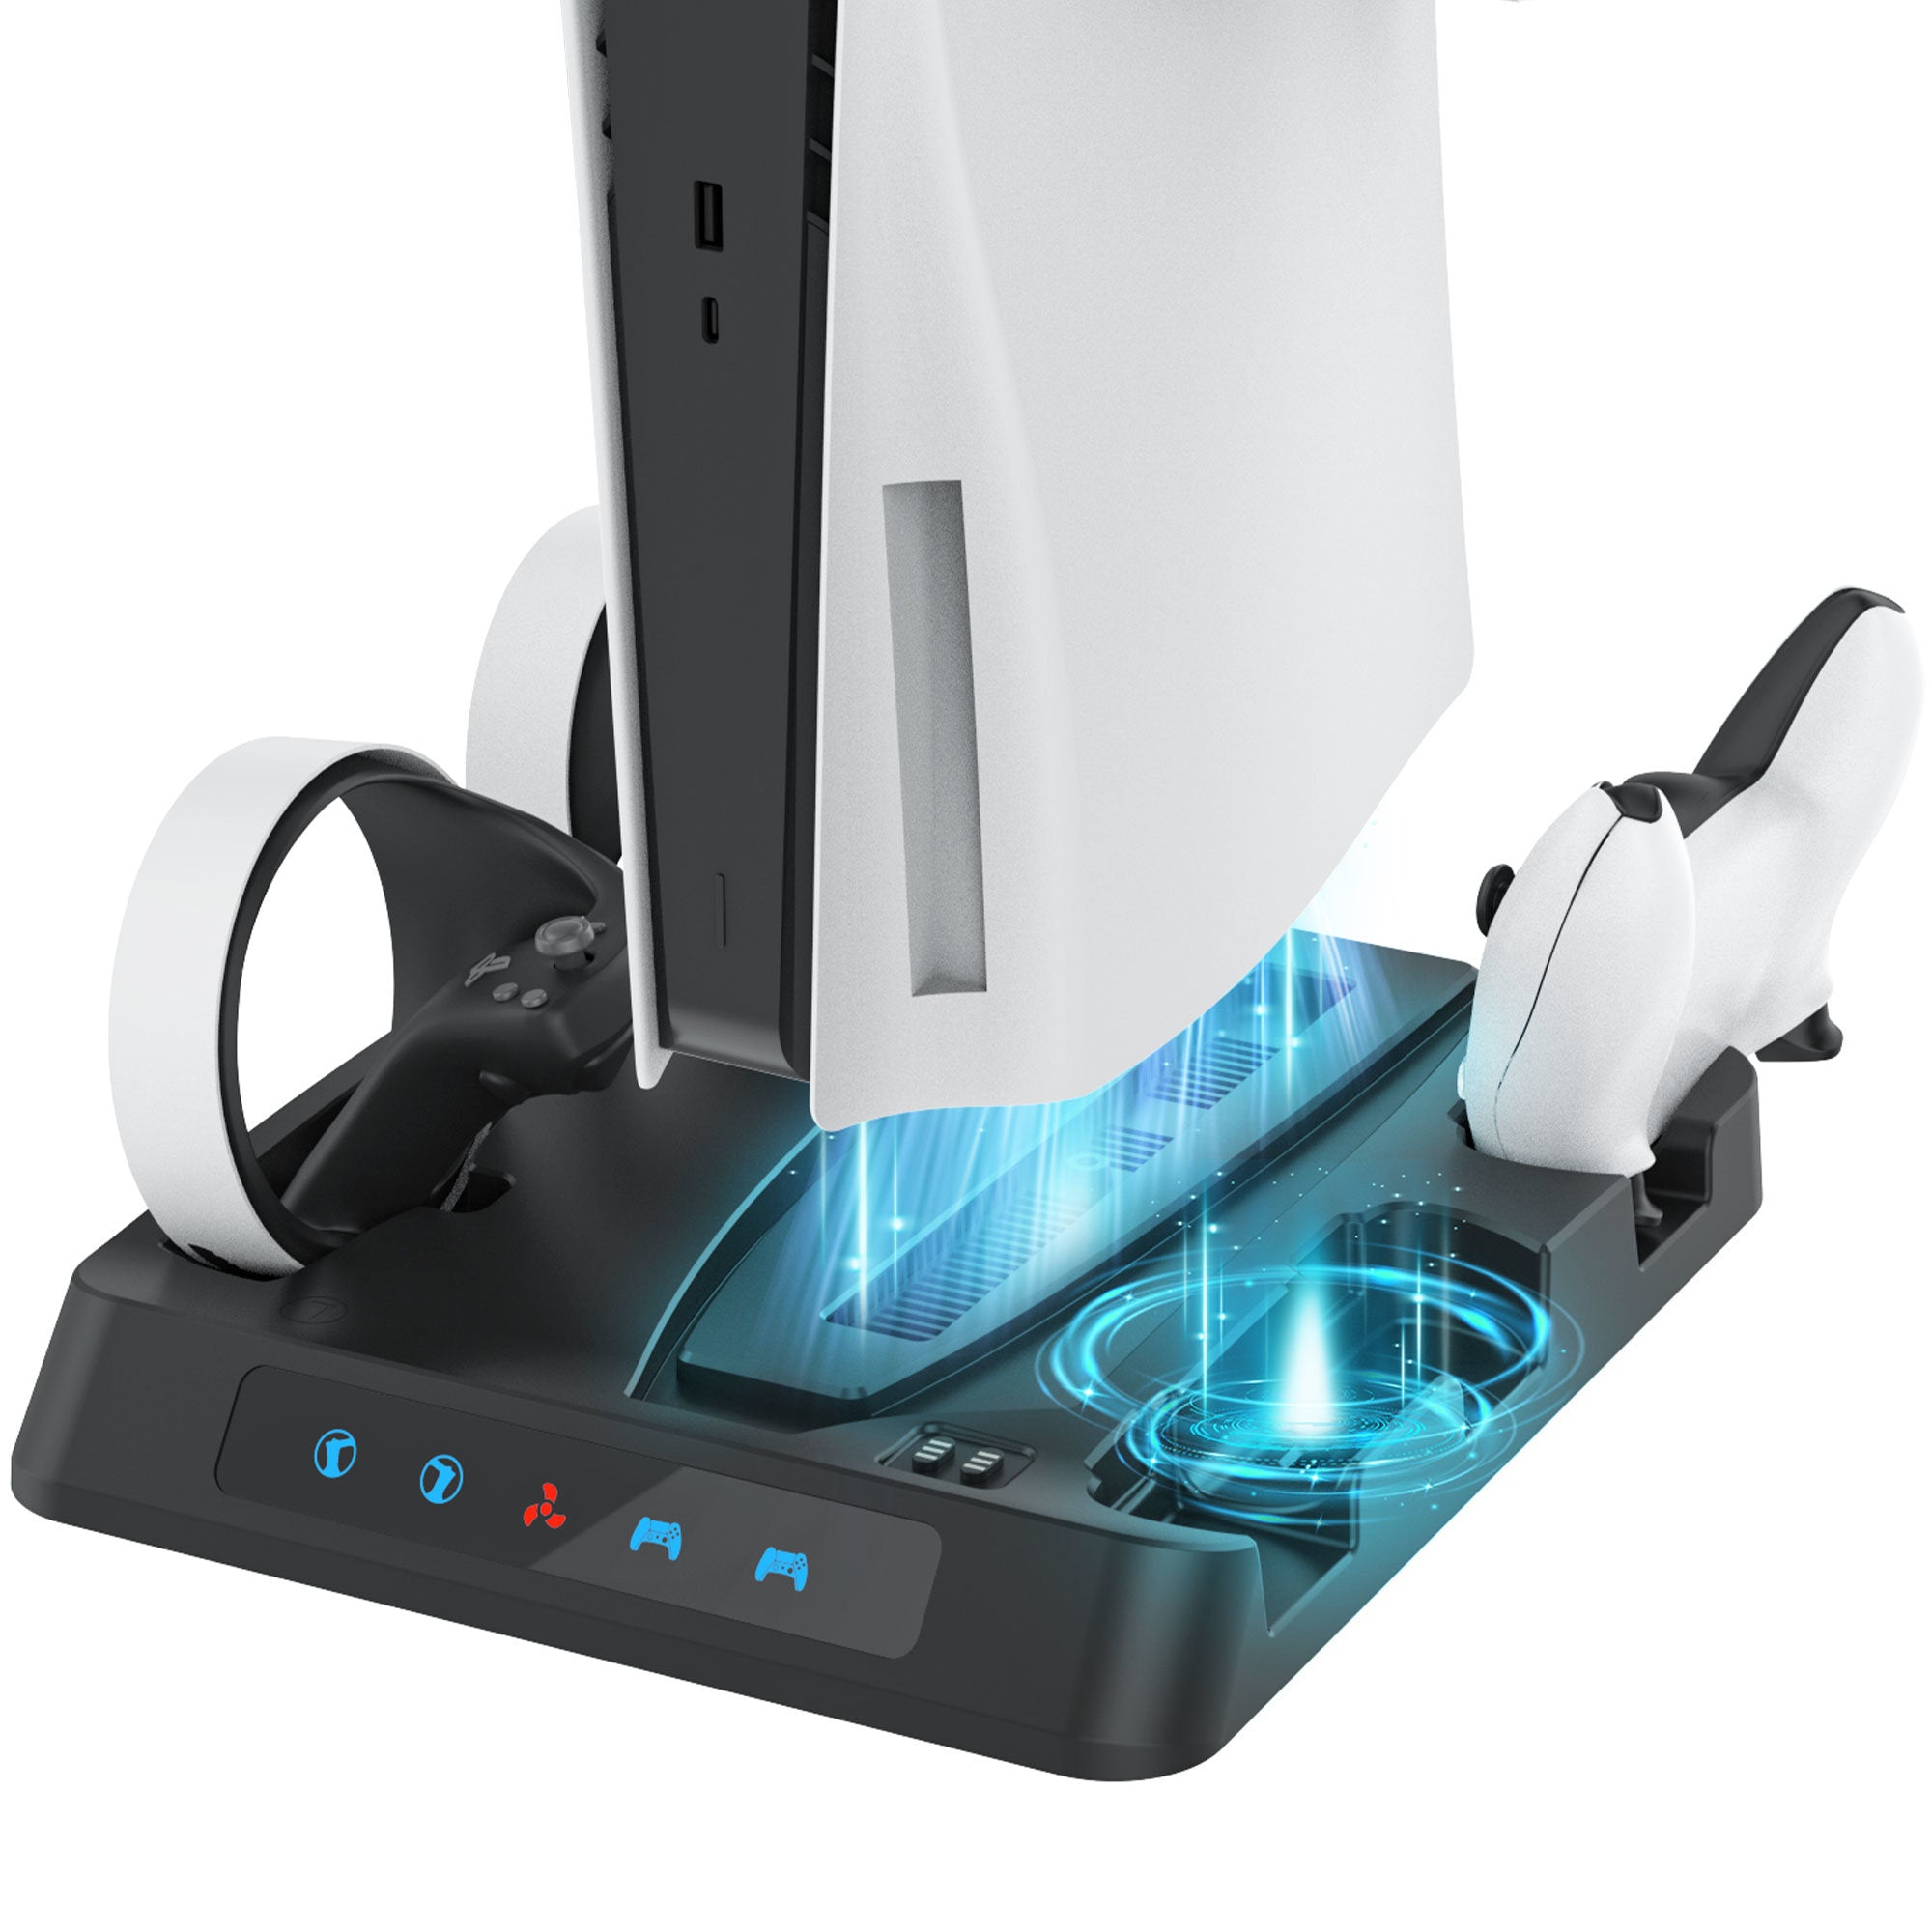 A gaming console with an Efficient Cooling System and Advanced Safety Features, along with an Upgraded PSVR2 Controller Charging Dock,PS5 Controller Charger, Cooling Station with 3-Level Speeds Silent Fan,VR and PS5 Stand Horizontal Display Your PSVR2 and PS5 Accessories located on top of it.